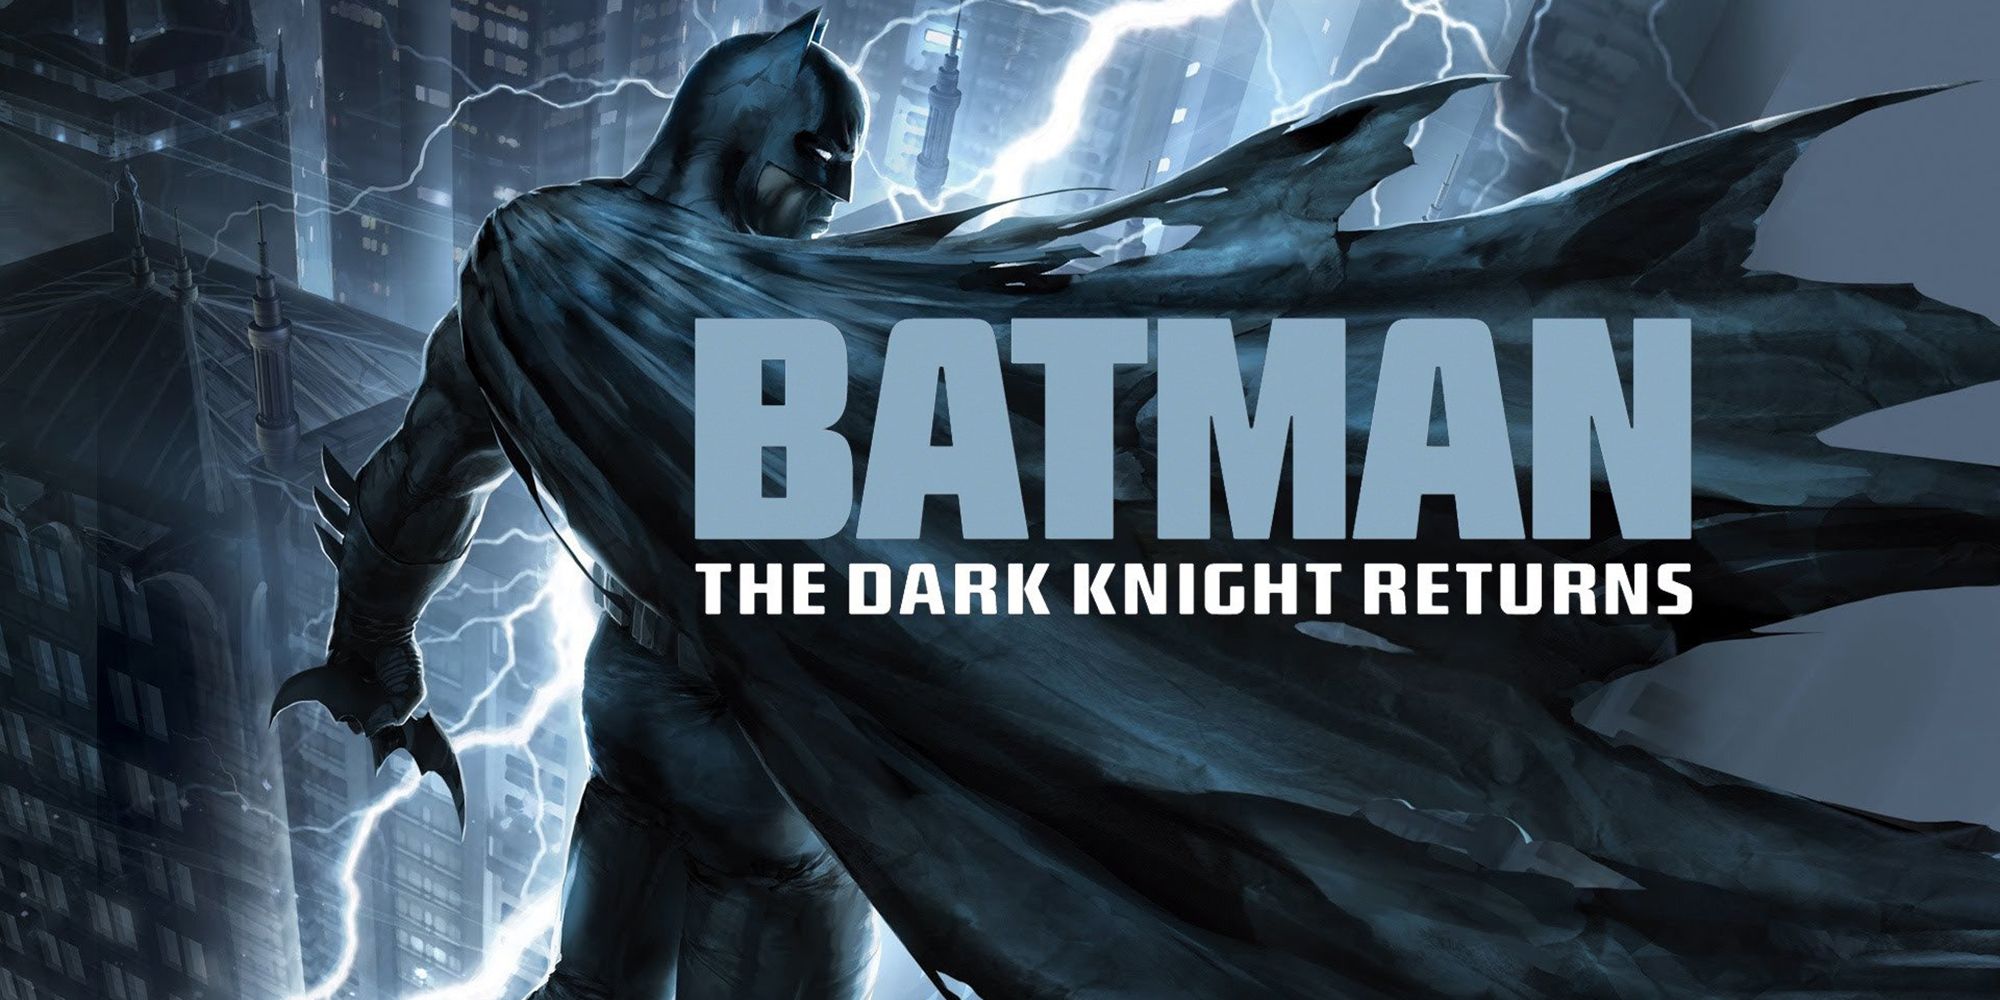 The Dark Knight Returns, Part 1 and Part 2 (2012)